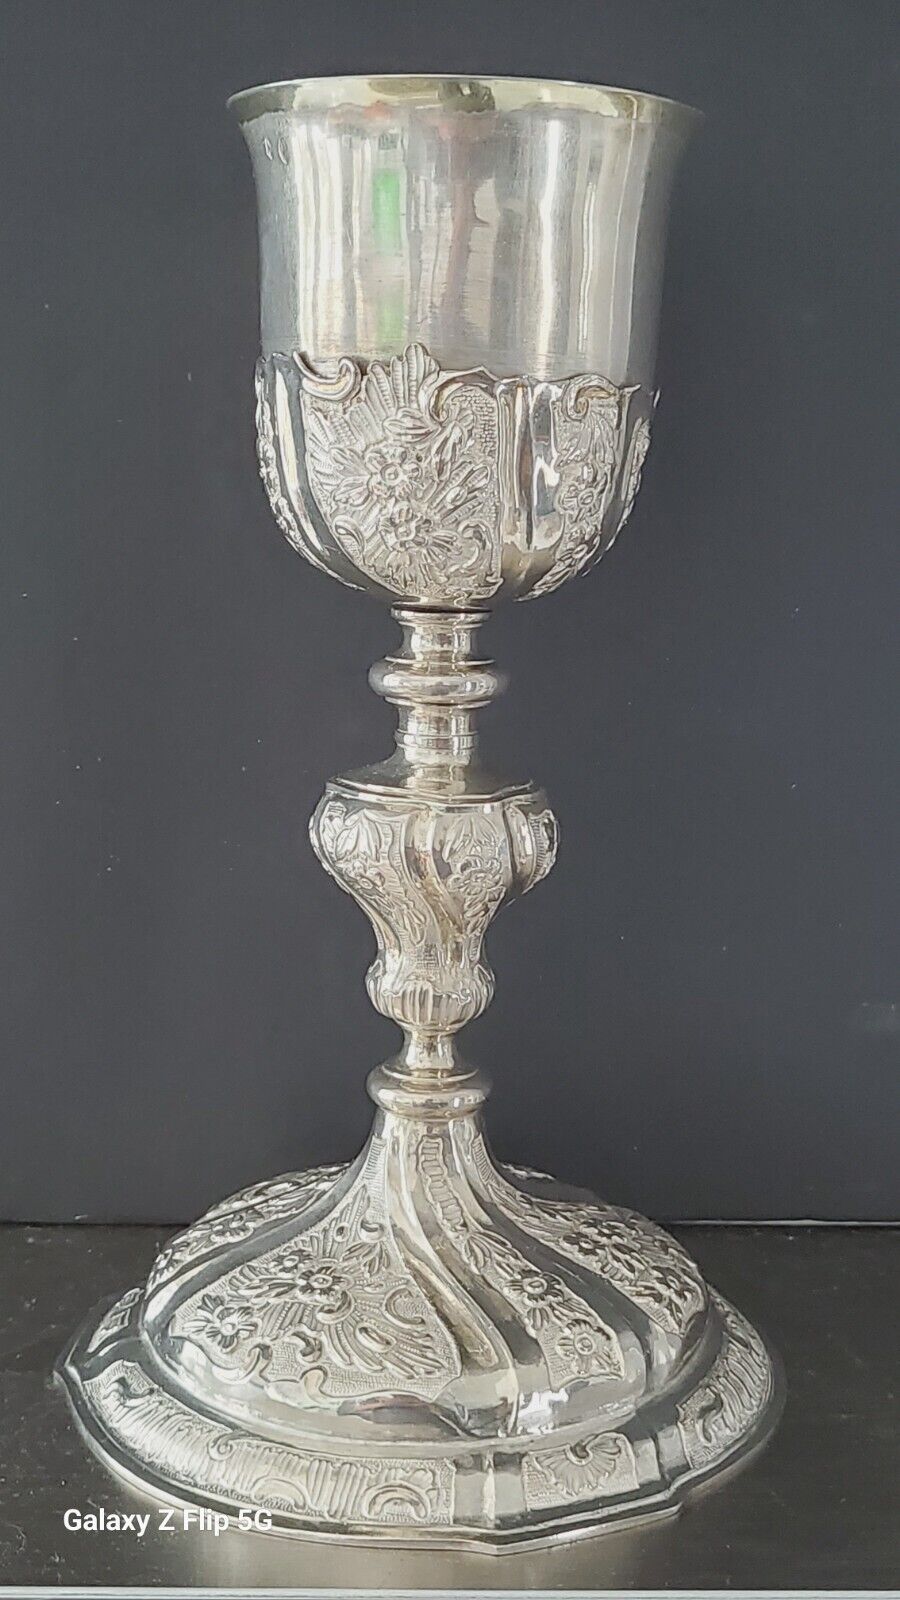 LARGE BEAUTIFUL ANTIQUE AUSTRO HUNGARIAN CONTINENTAL EUROPEAN SILVER CHALICE